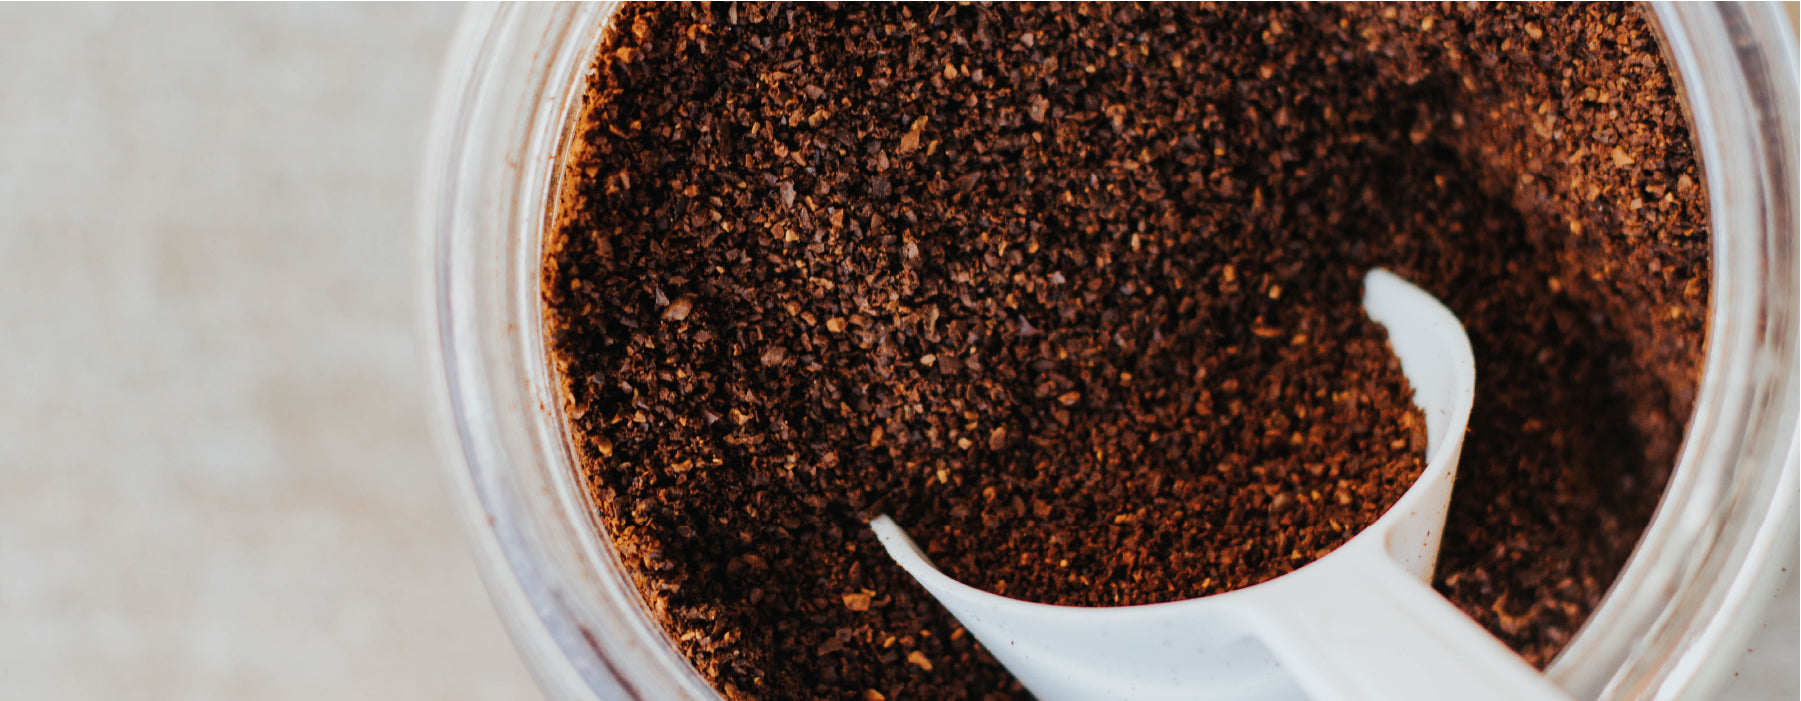 The 10 Best Ways to Recycle Coffee Grounds - Coffee Life by EspressoWorks